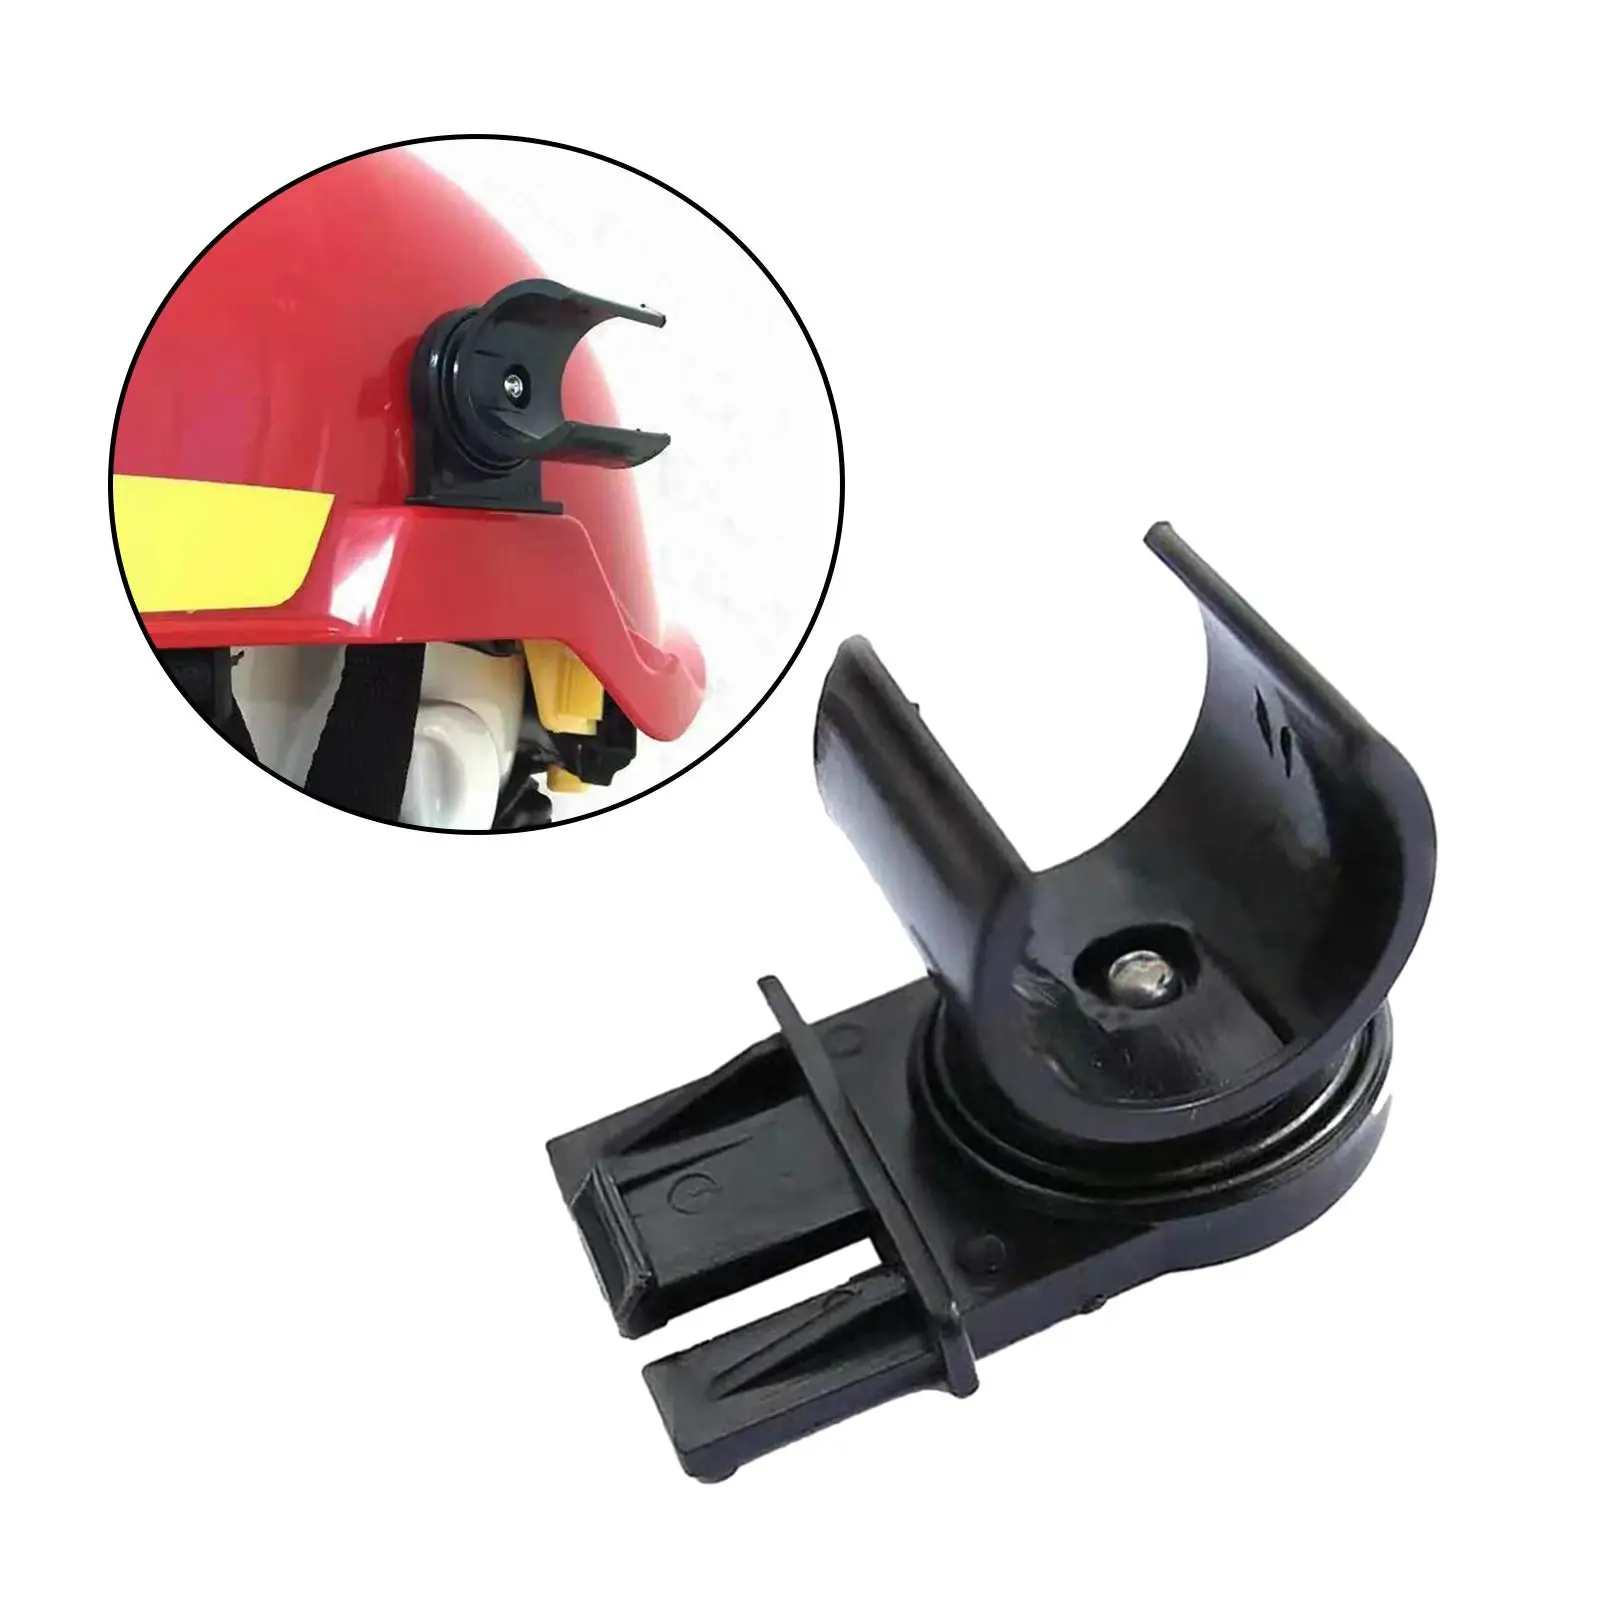 Hardhat Flashlight Holder Mount Bracket Portable Bracket Torch Mount Clamp for Outdoor Cycling Construction Workers Outdoor Work